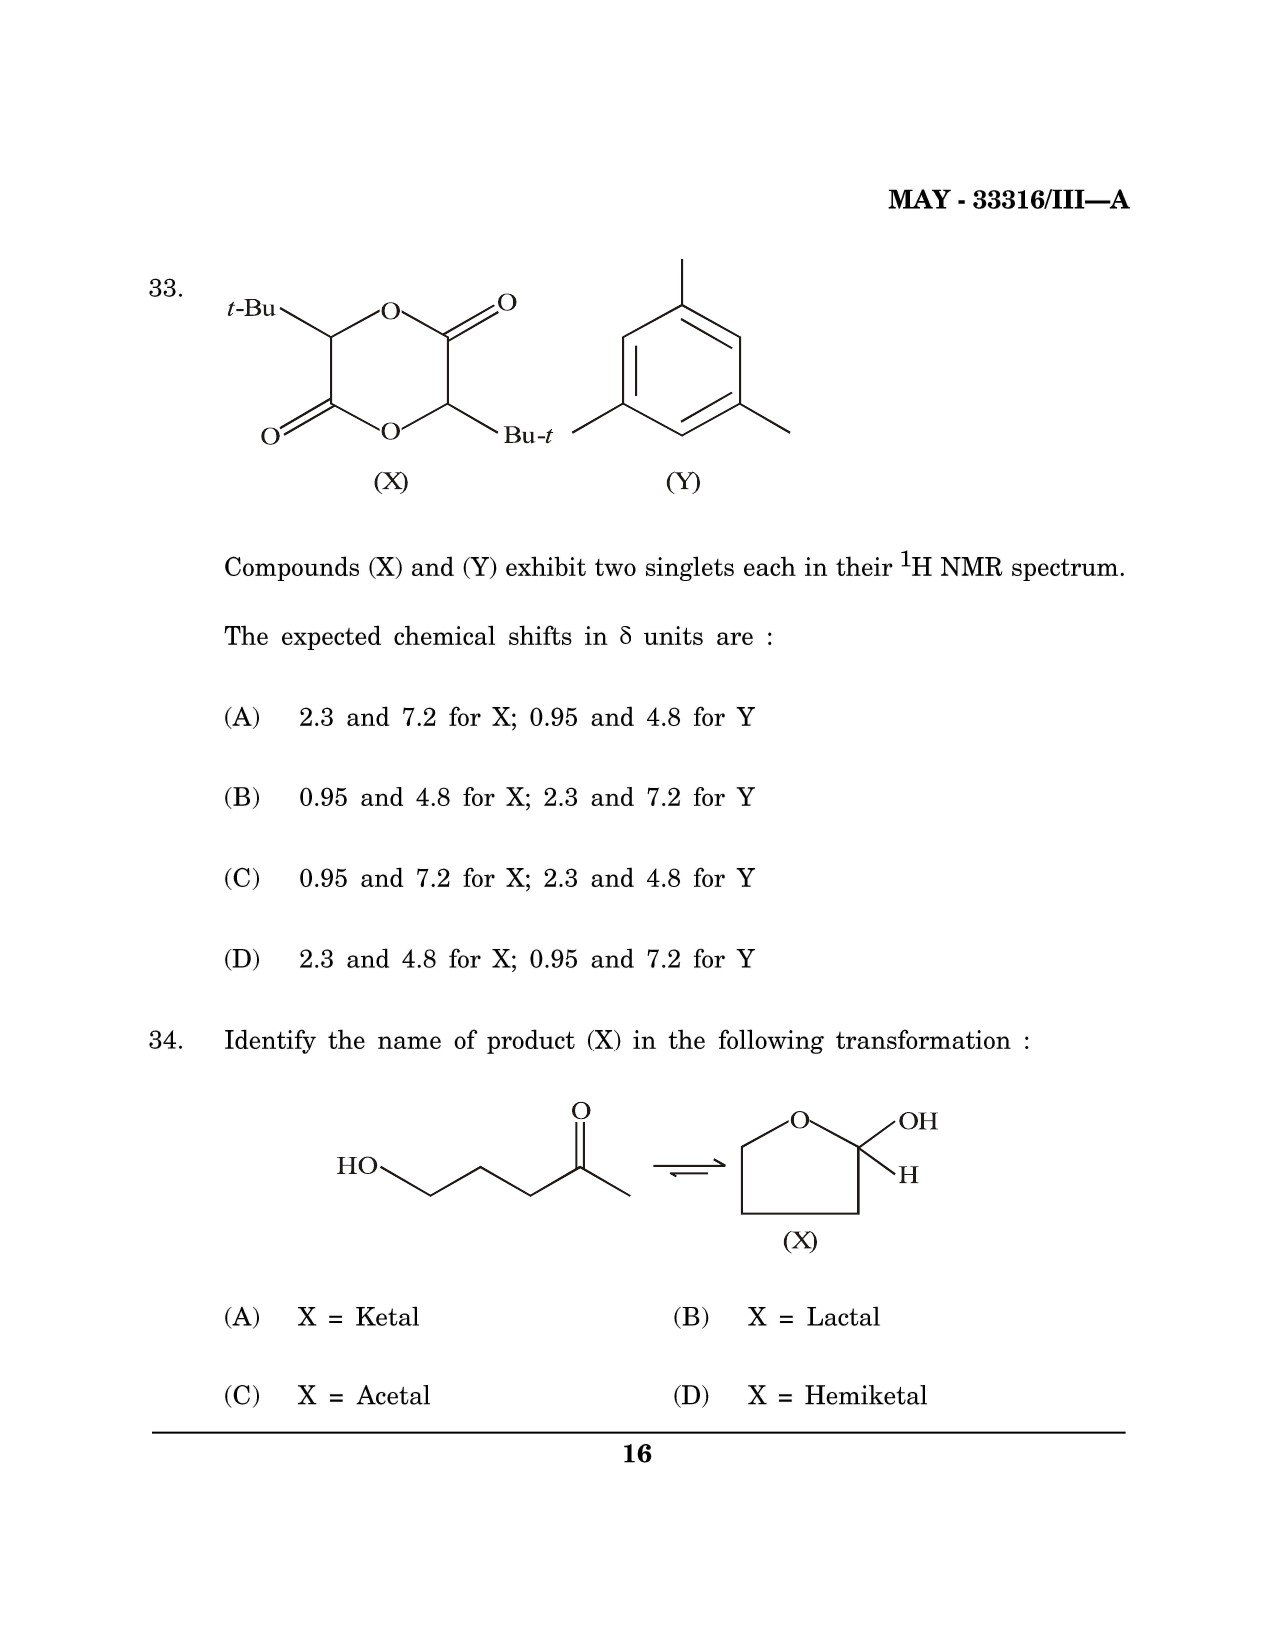 Maharashtra SET Chemical Sciences Question Paper III May 2016 15